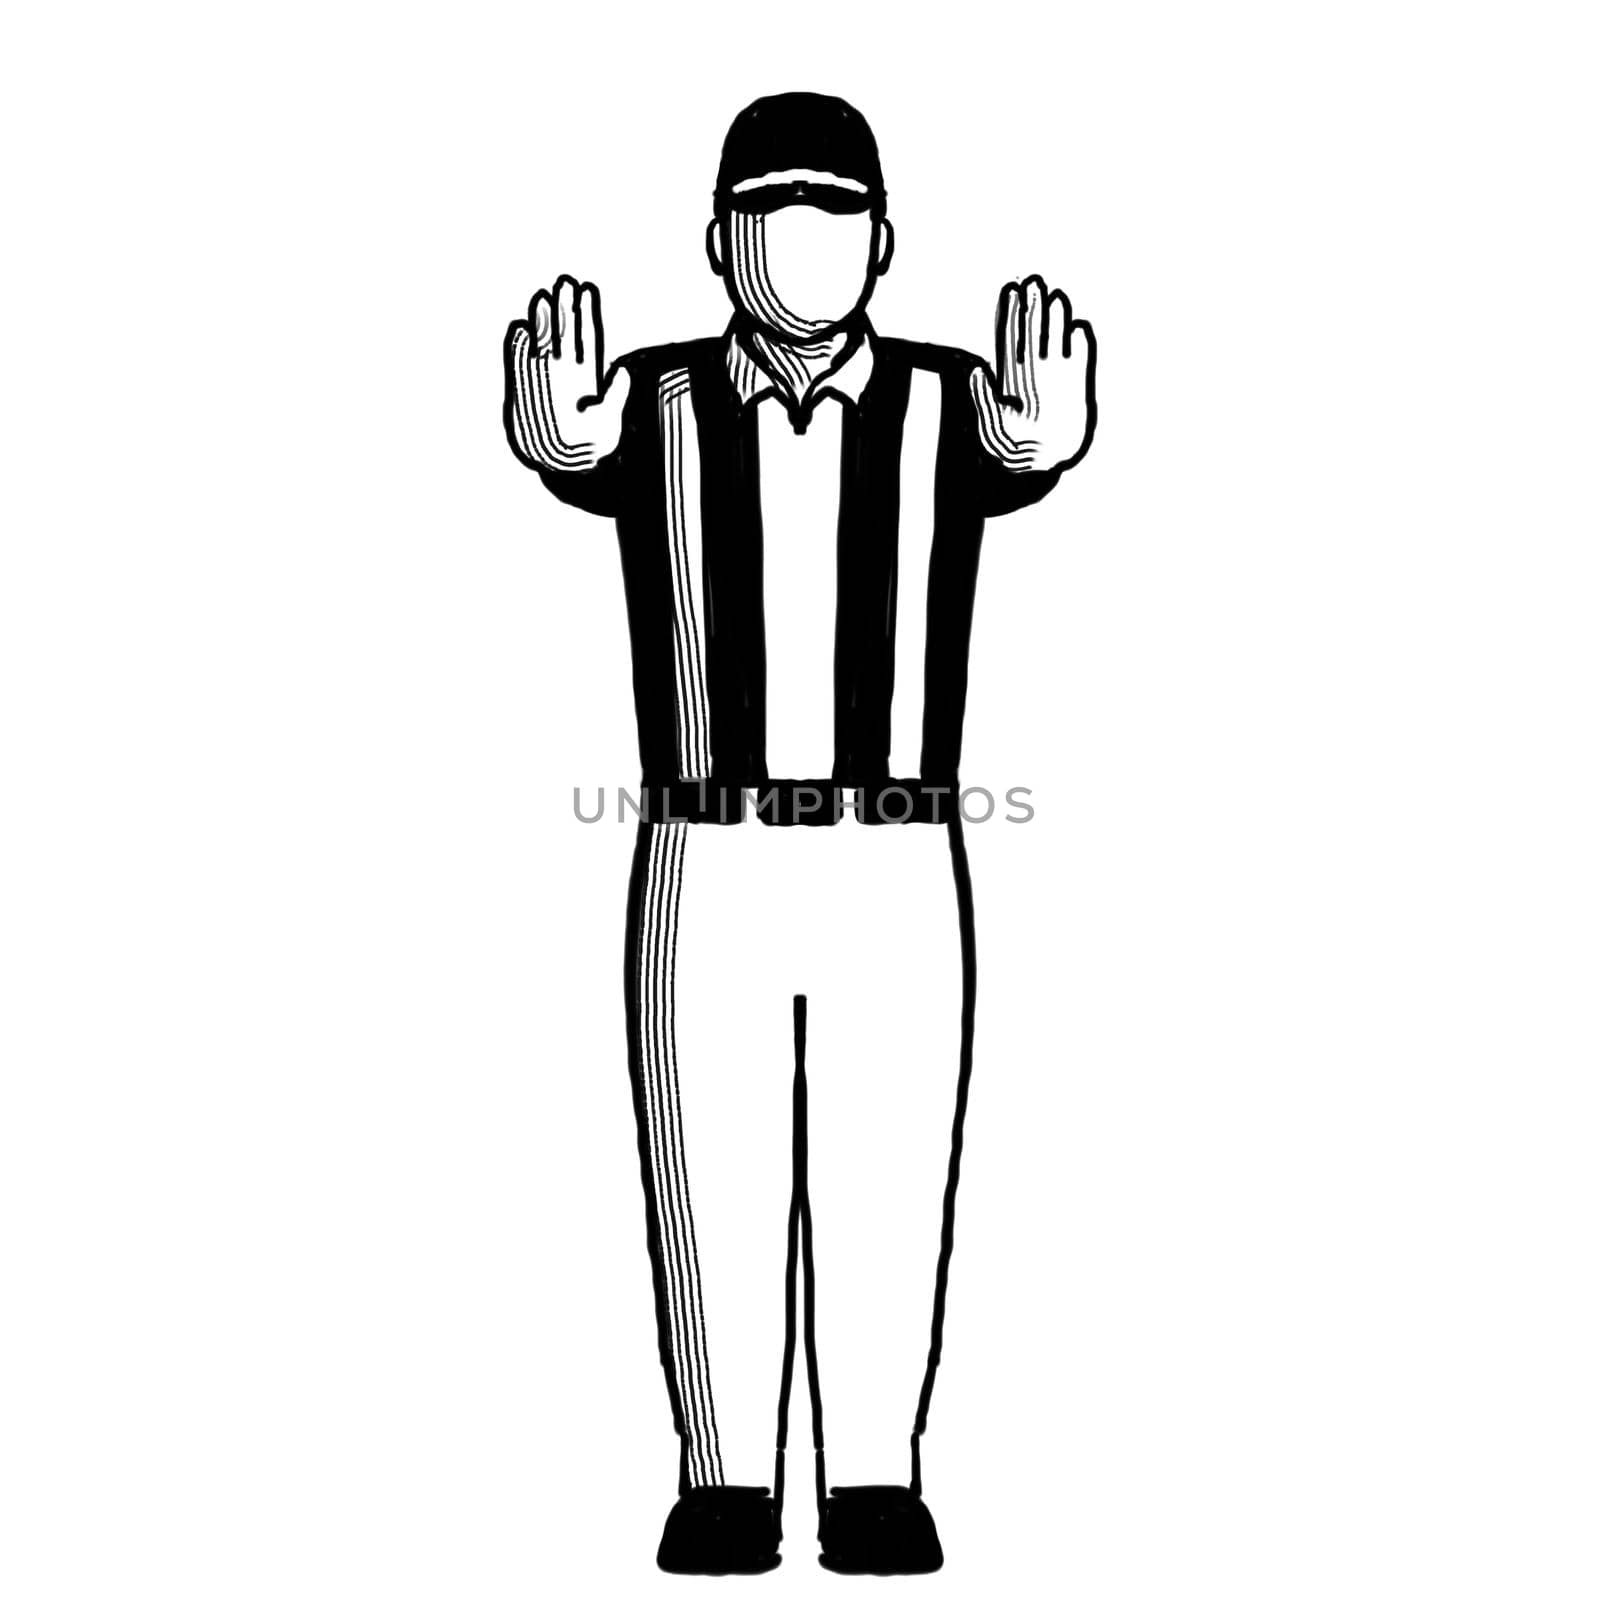 Retro style illustration of an American football referee or official with hand signal showing pass interference sign on isolated background done in black and white.